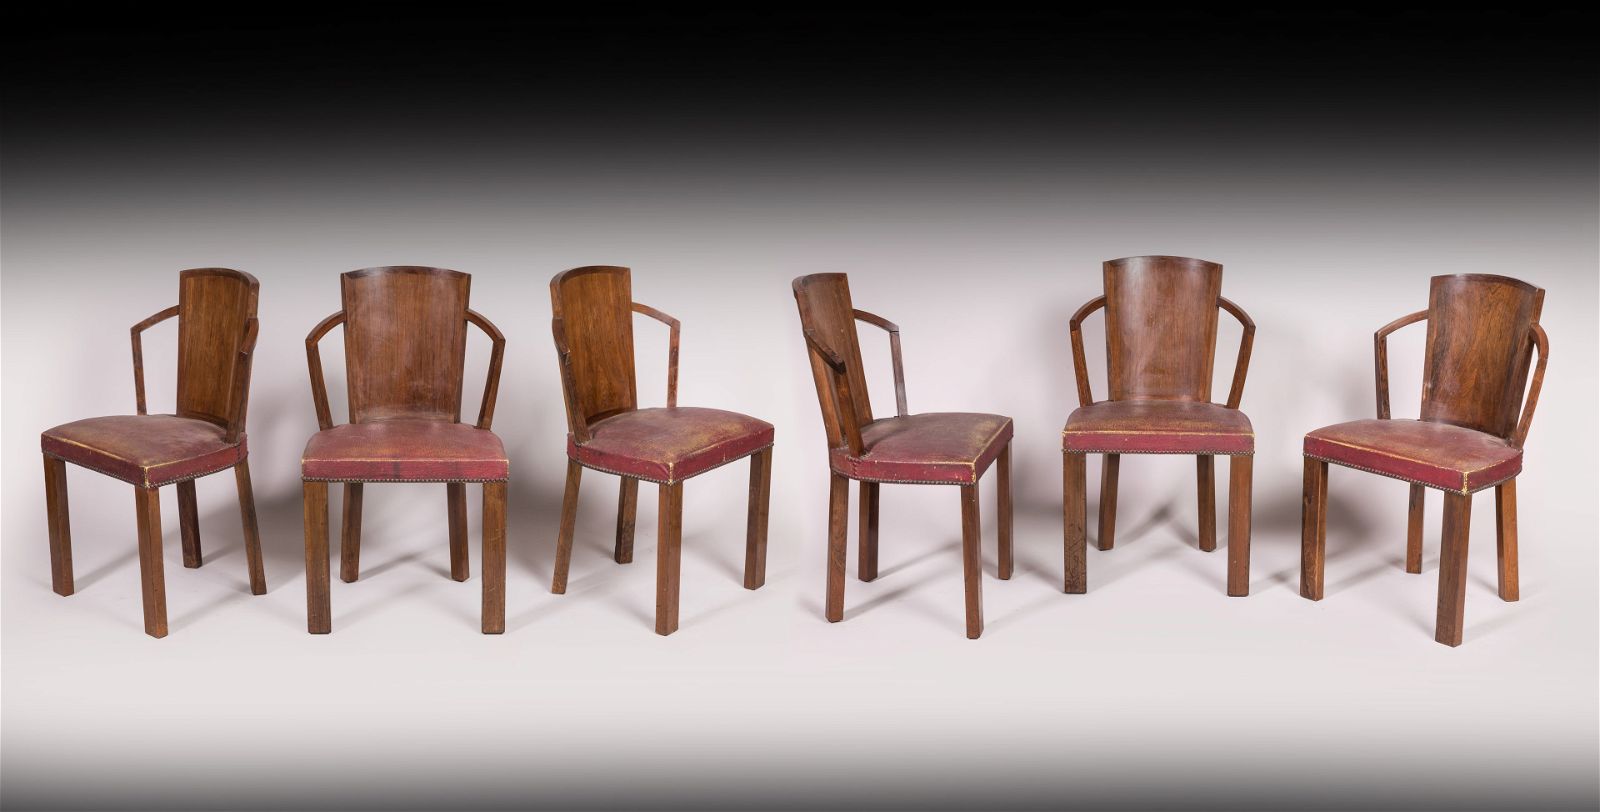 Suite of eight Modernist chairs by Pierre Chareau, model MF 275, which sold for €124,000 ($134,280) with buyer’s premium at Valoir Pousse-Cornet.